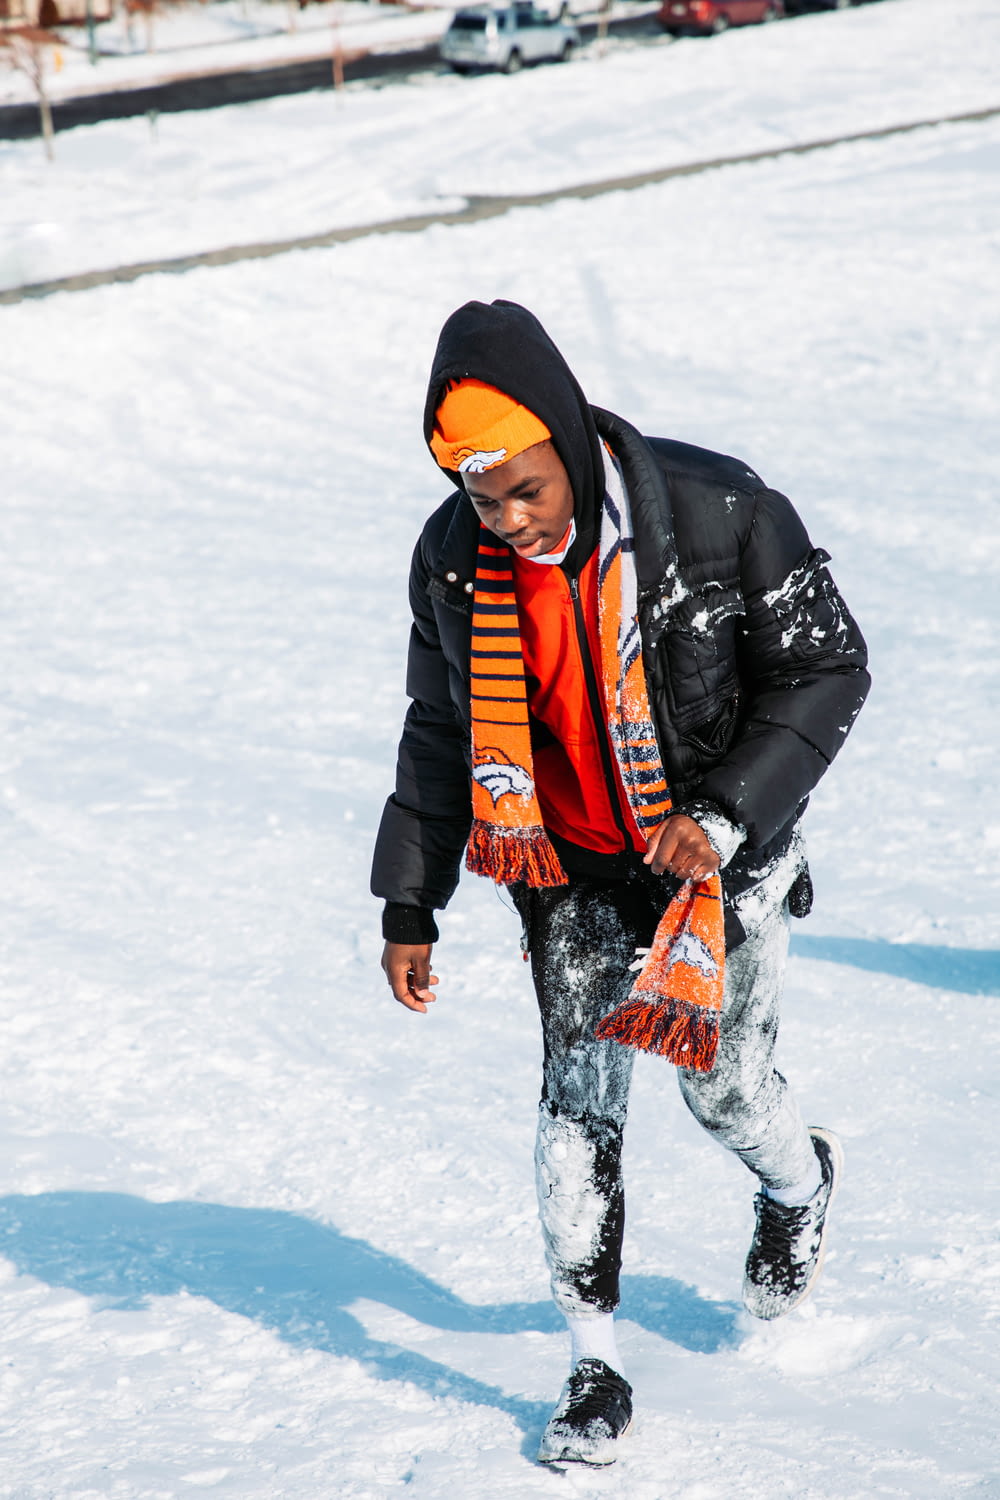 a young boy in a black jacket and orange scarf snowboarding